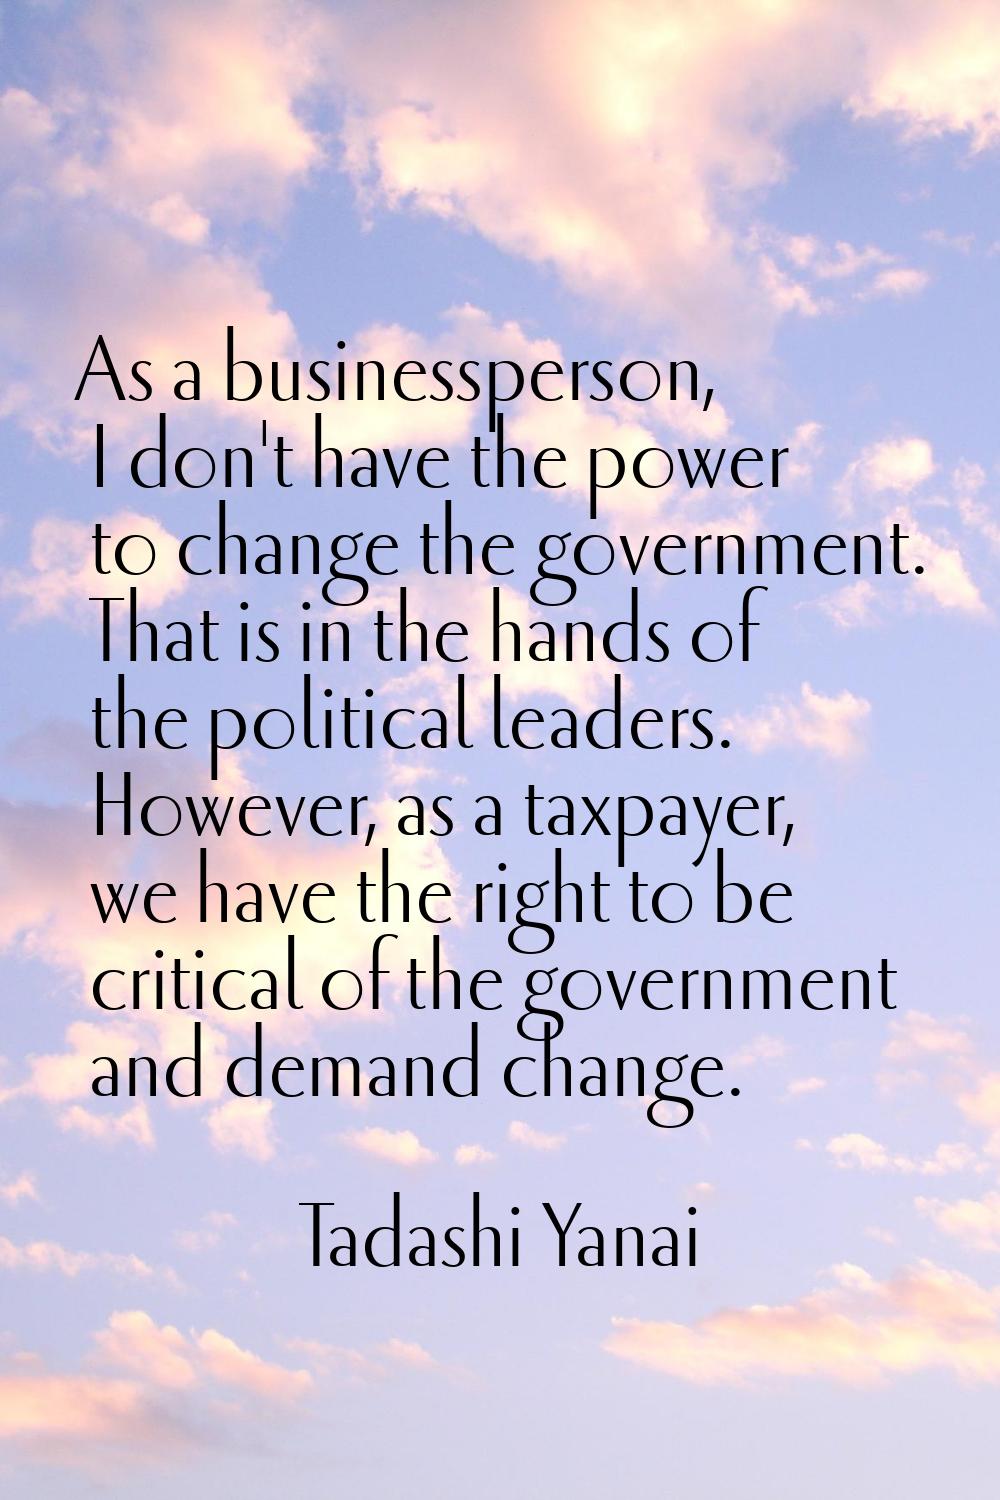 As a businessperson, I don't have the power to change the government. That is in the hands of the p